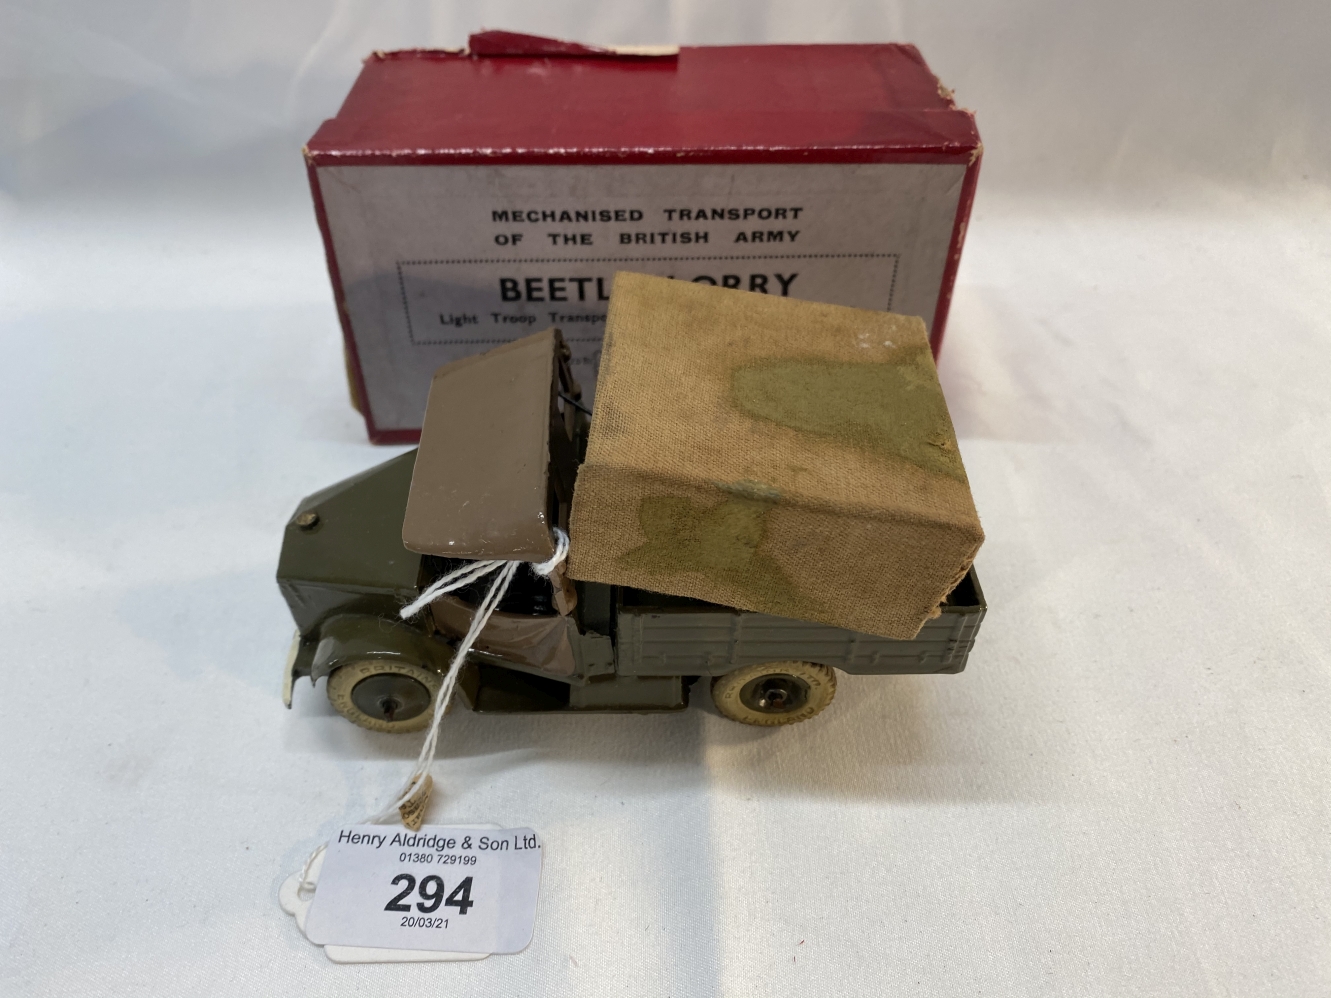 Military Toys: W. Britain, Beetle lorry, light troop transport and general service truck with